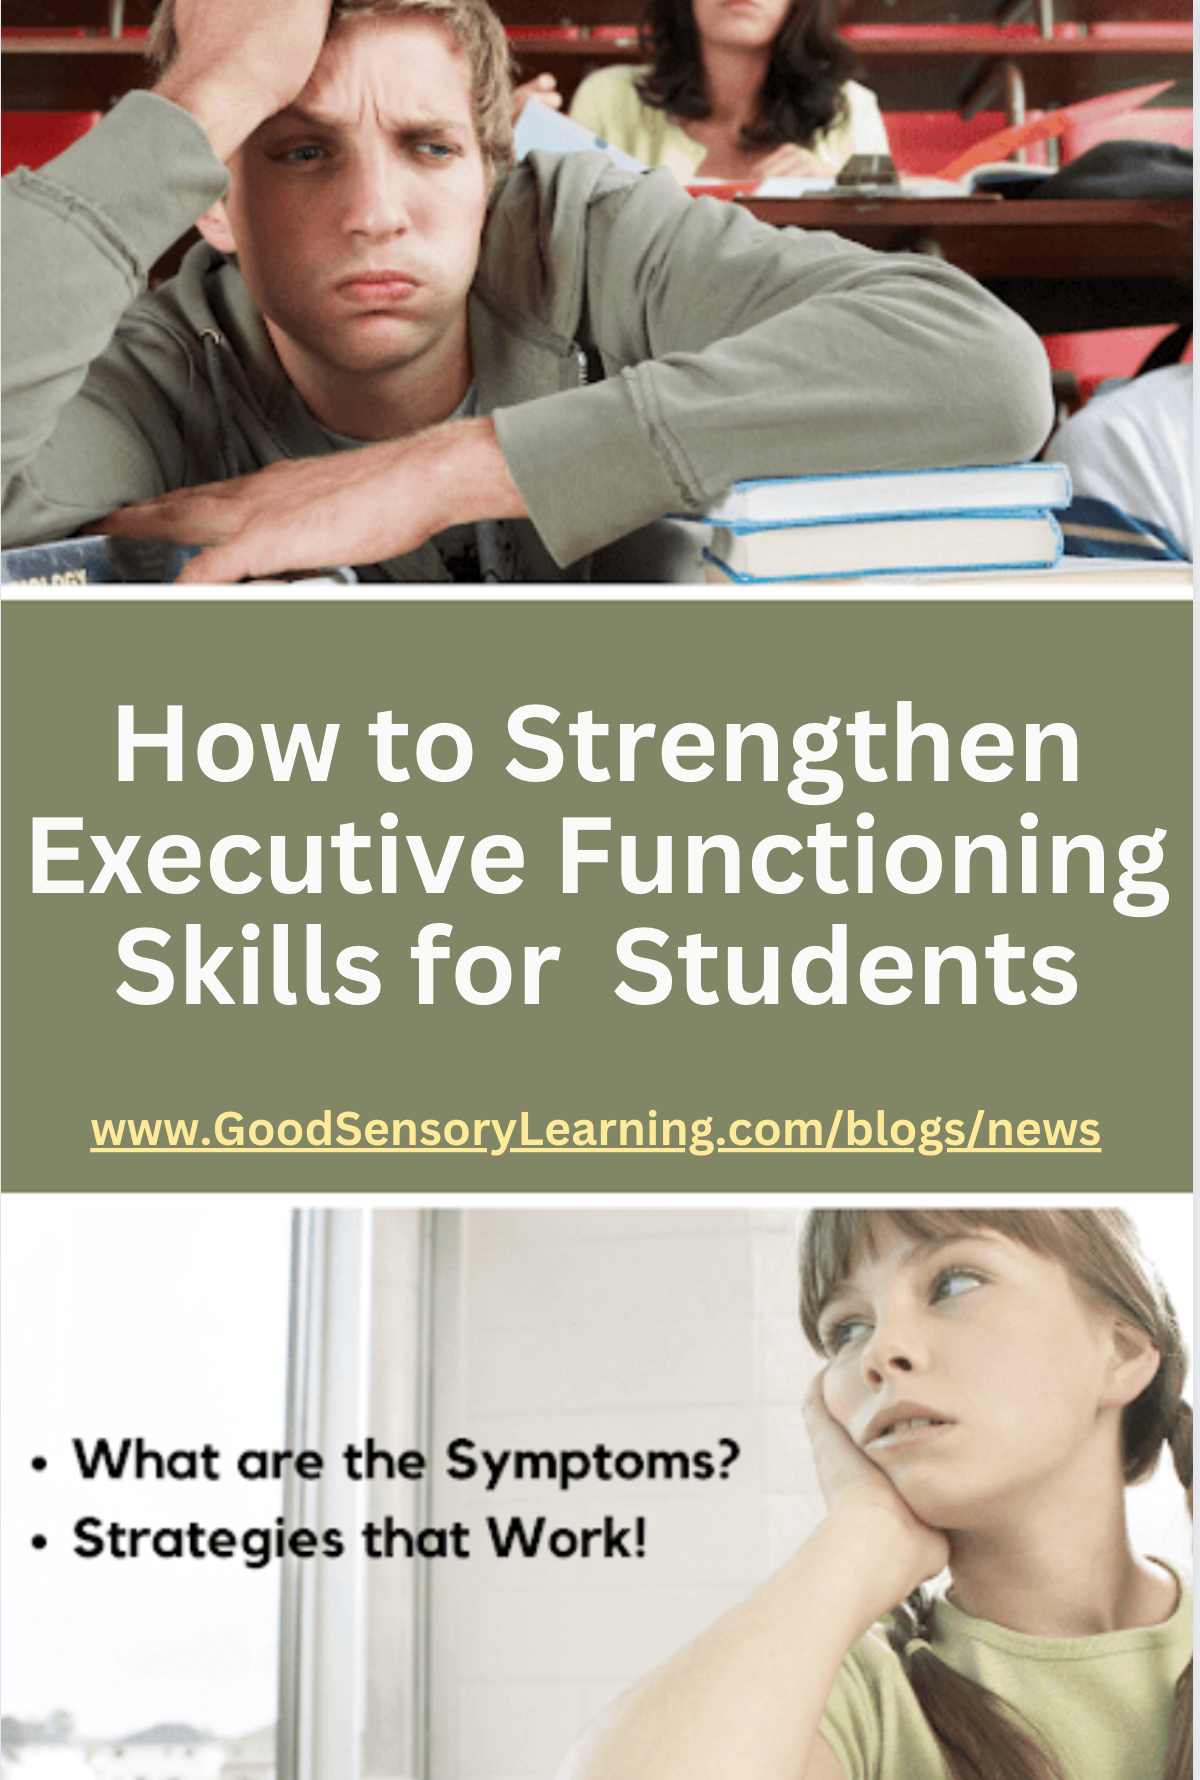 How to improve executive functioning skills